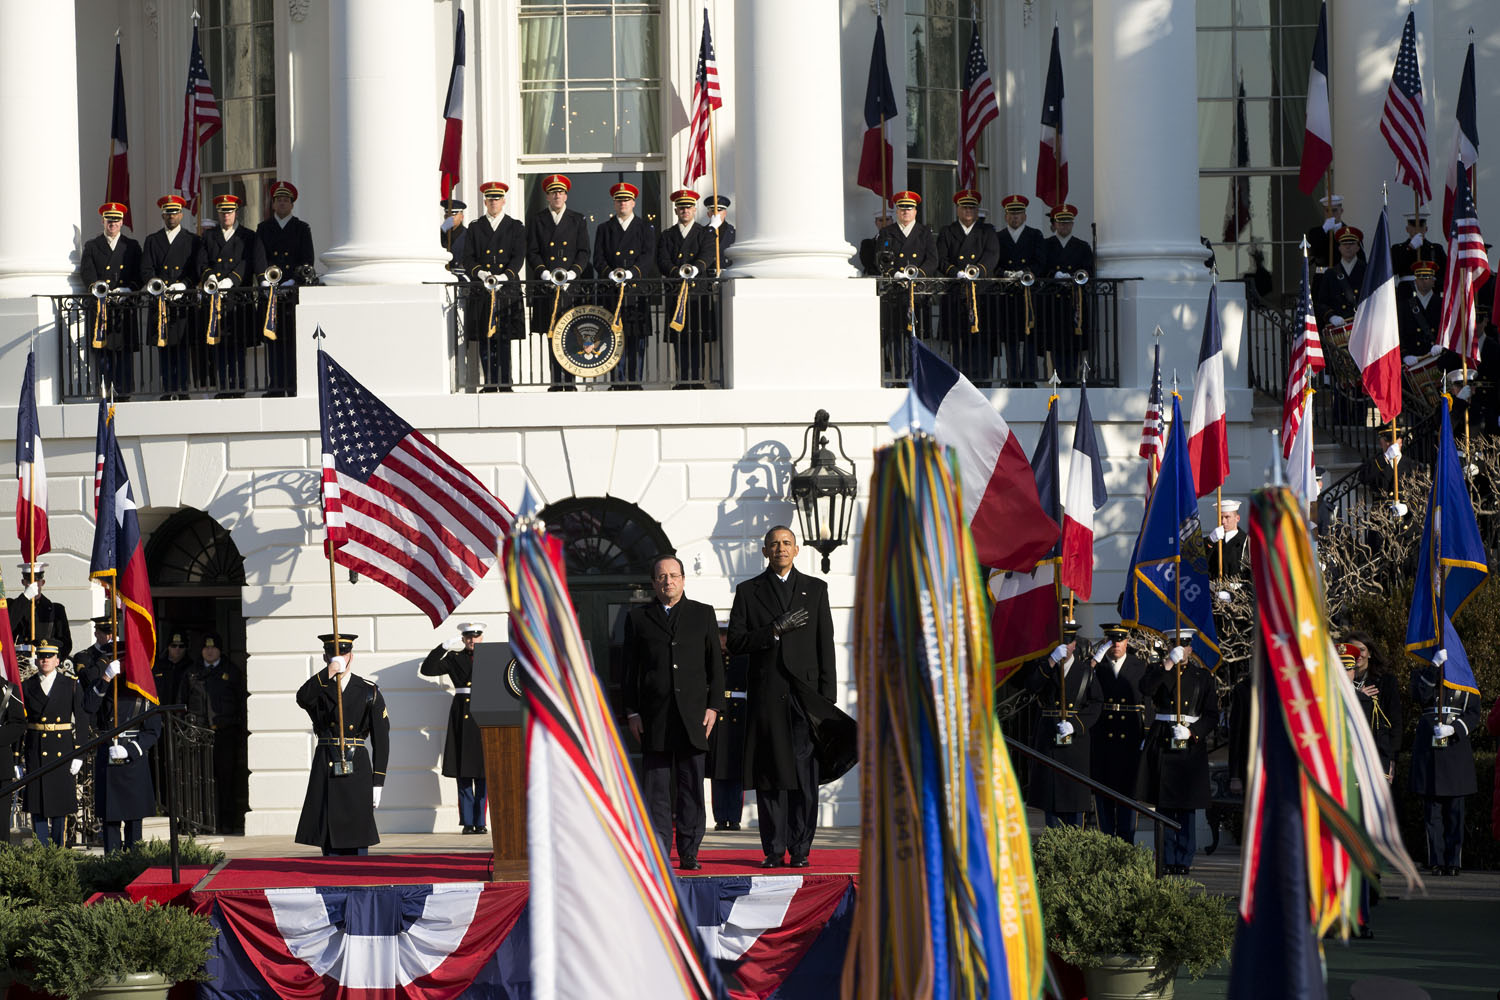 Feb. 11, 2014. President Barack Obama and French President François Hollande stand for the national anthem during a state arrival ceremony on the South Lawn of the White House in Washington.